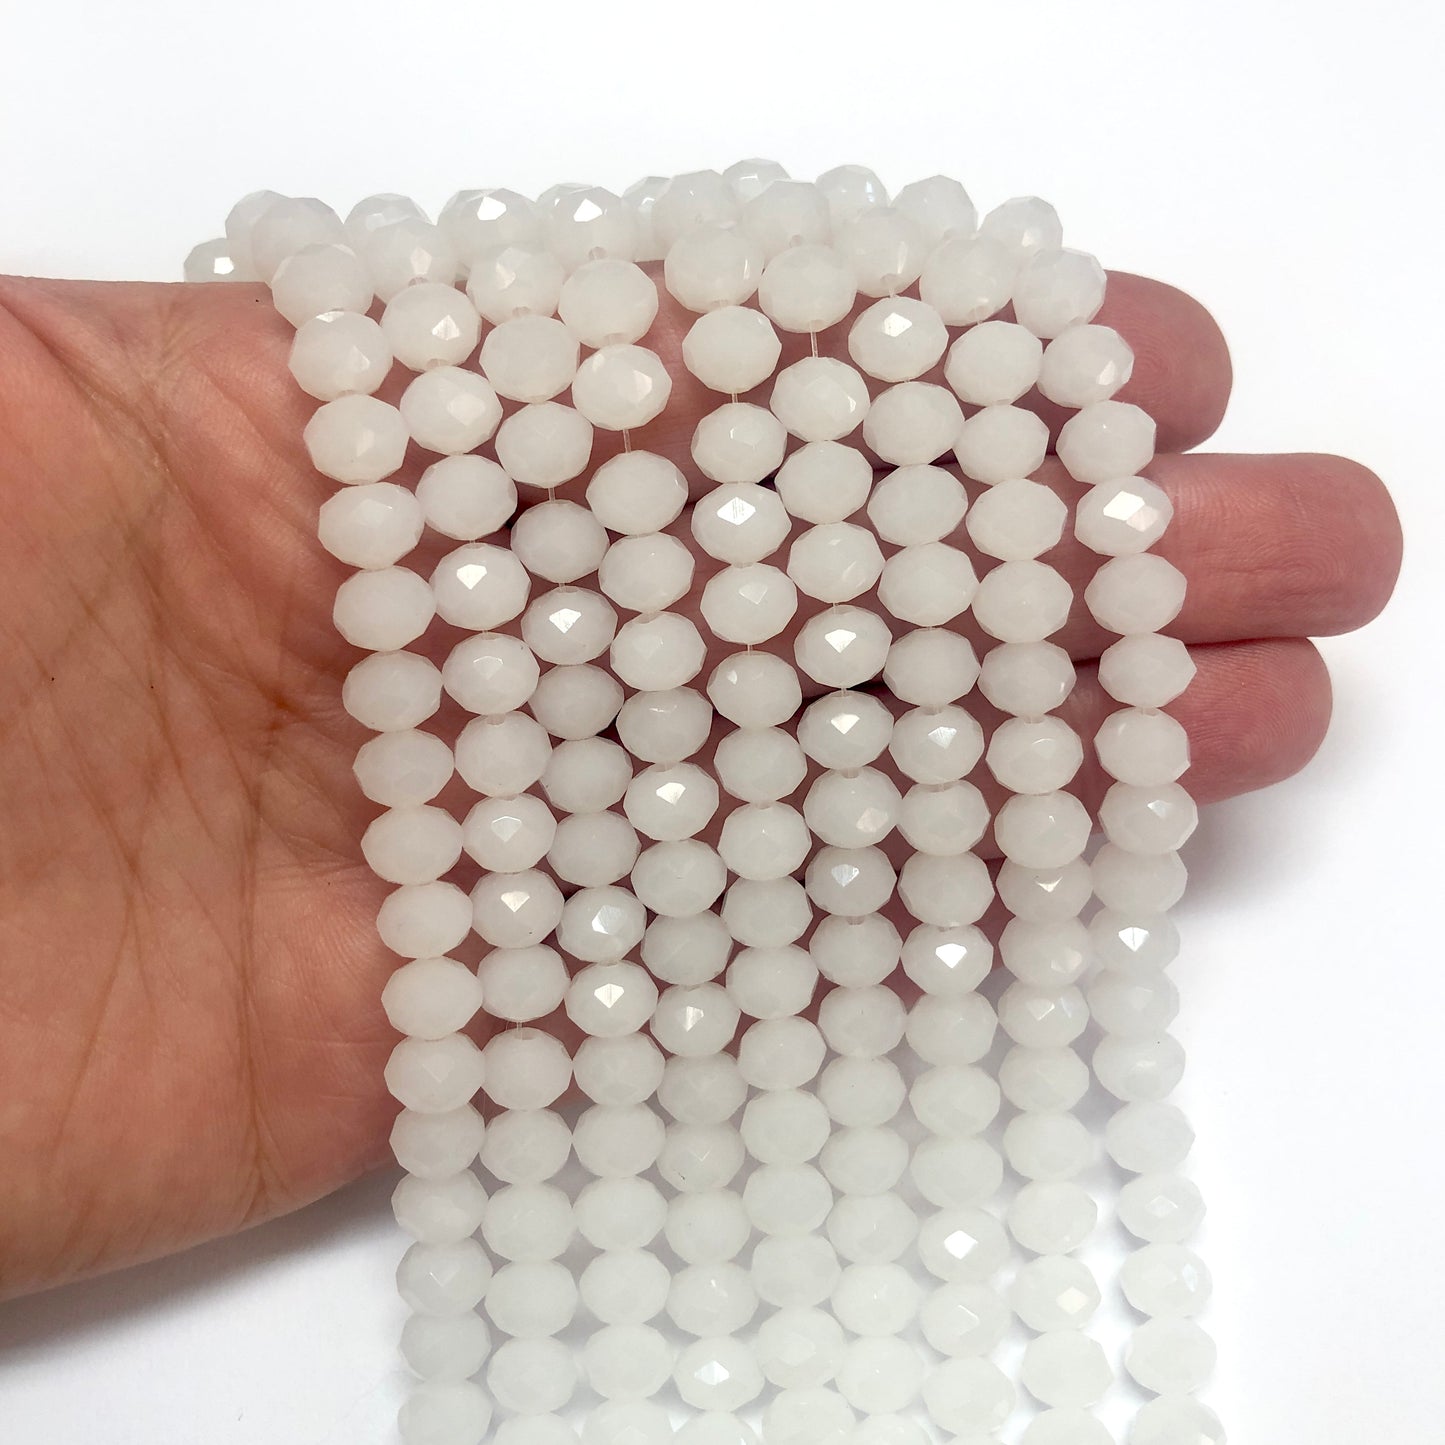 Crystal Bead, Chinese Crystal-8mm-4 (Icy White)